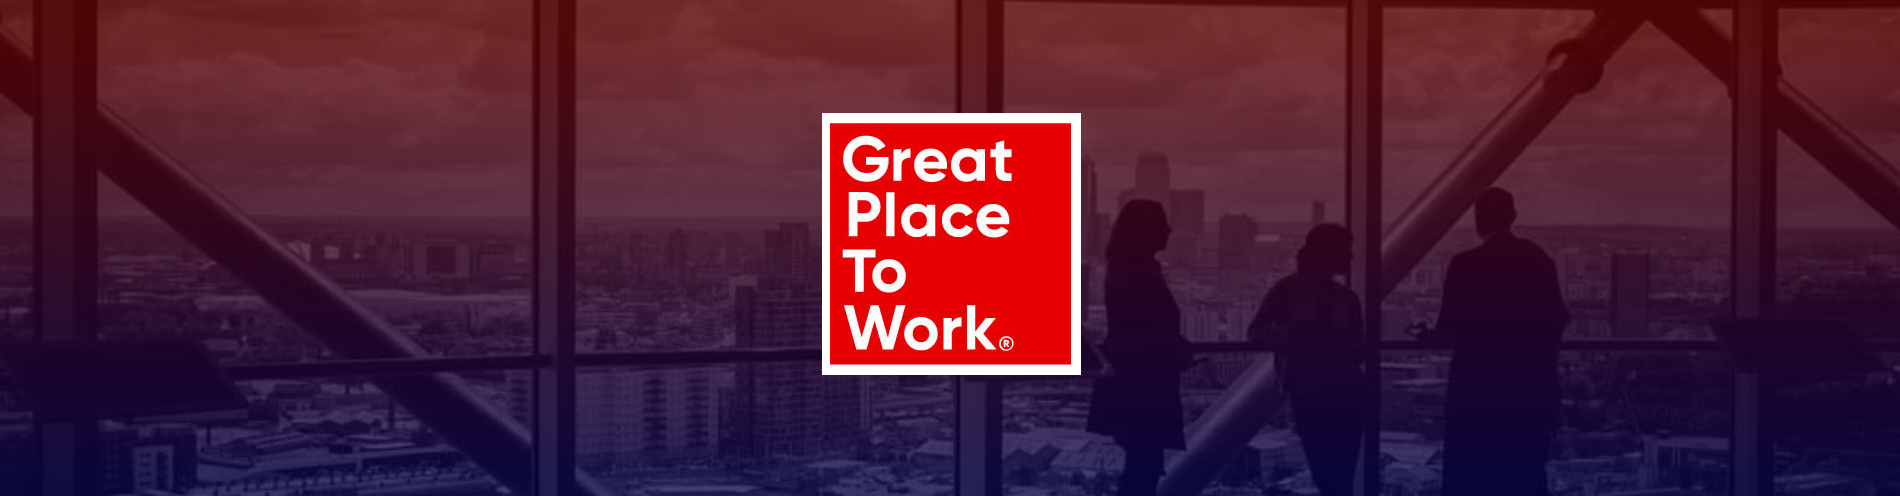 Great Place to Work - Eyepax IT Consulting